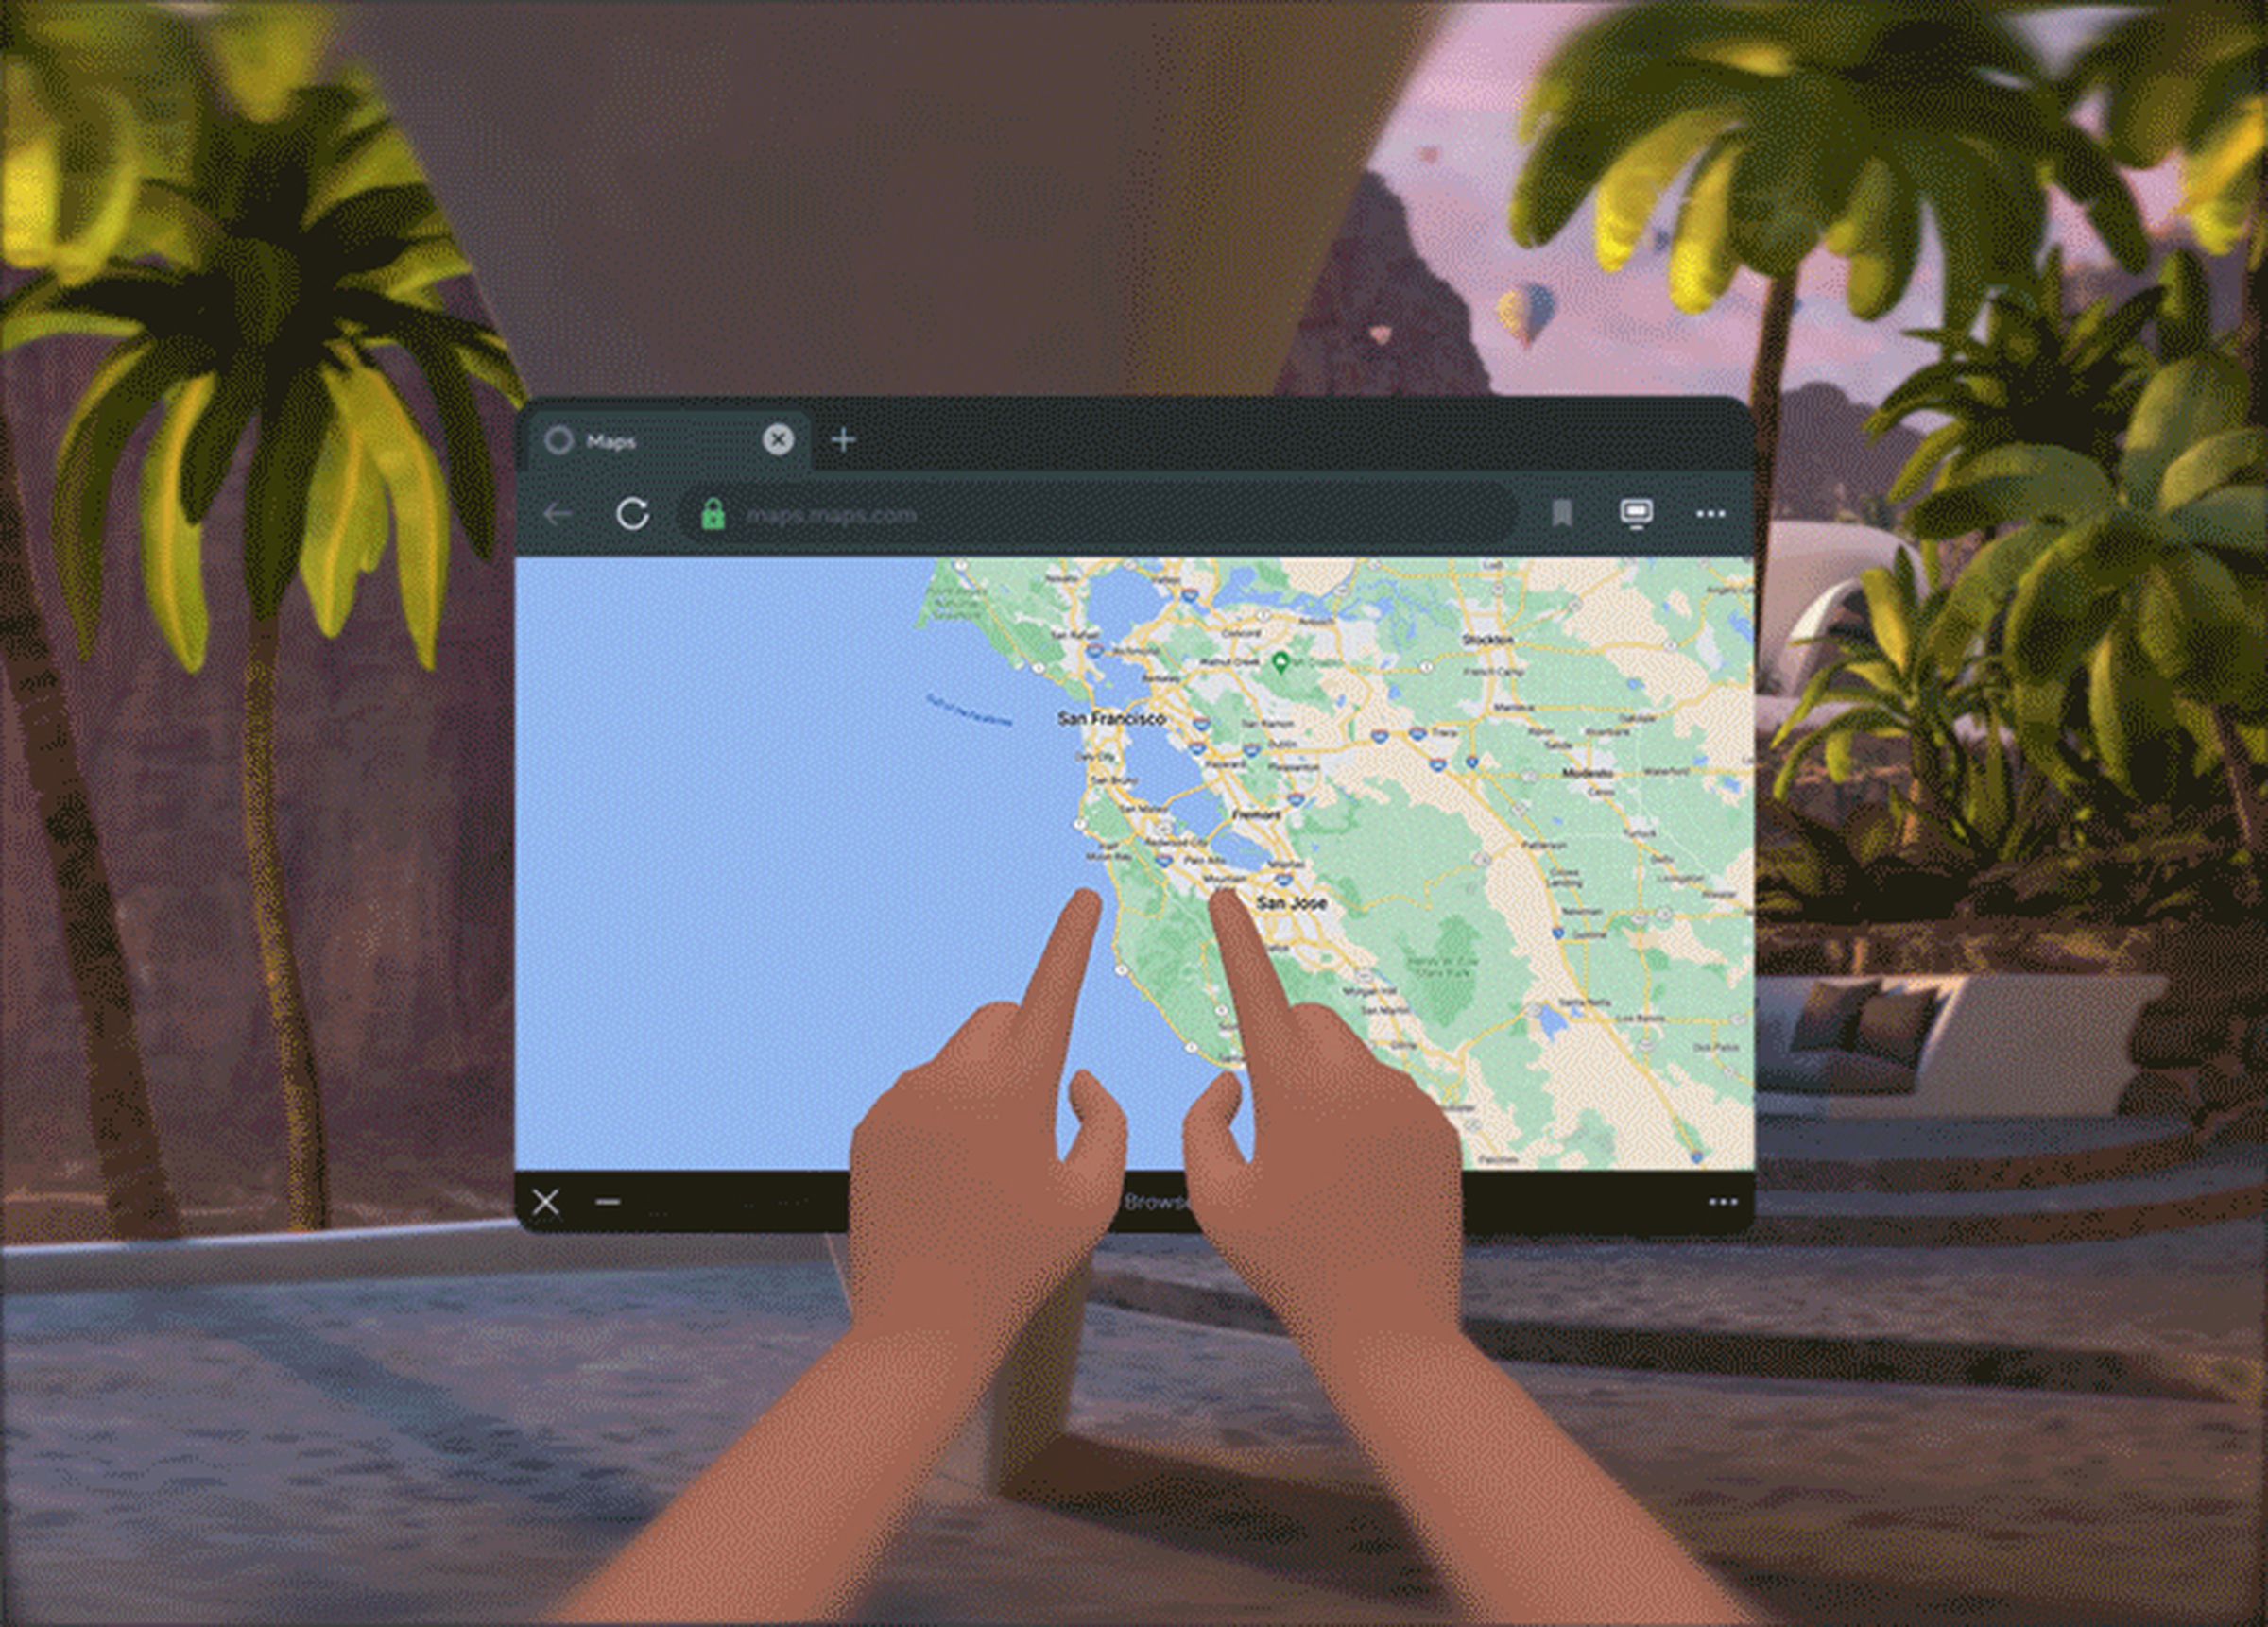 two floating 3d hands in front of a 2D web browser window that has a map.